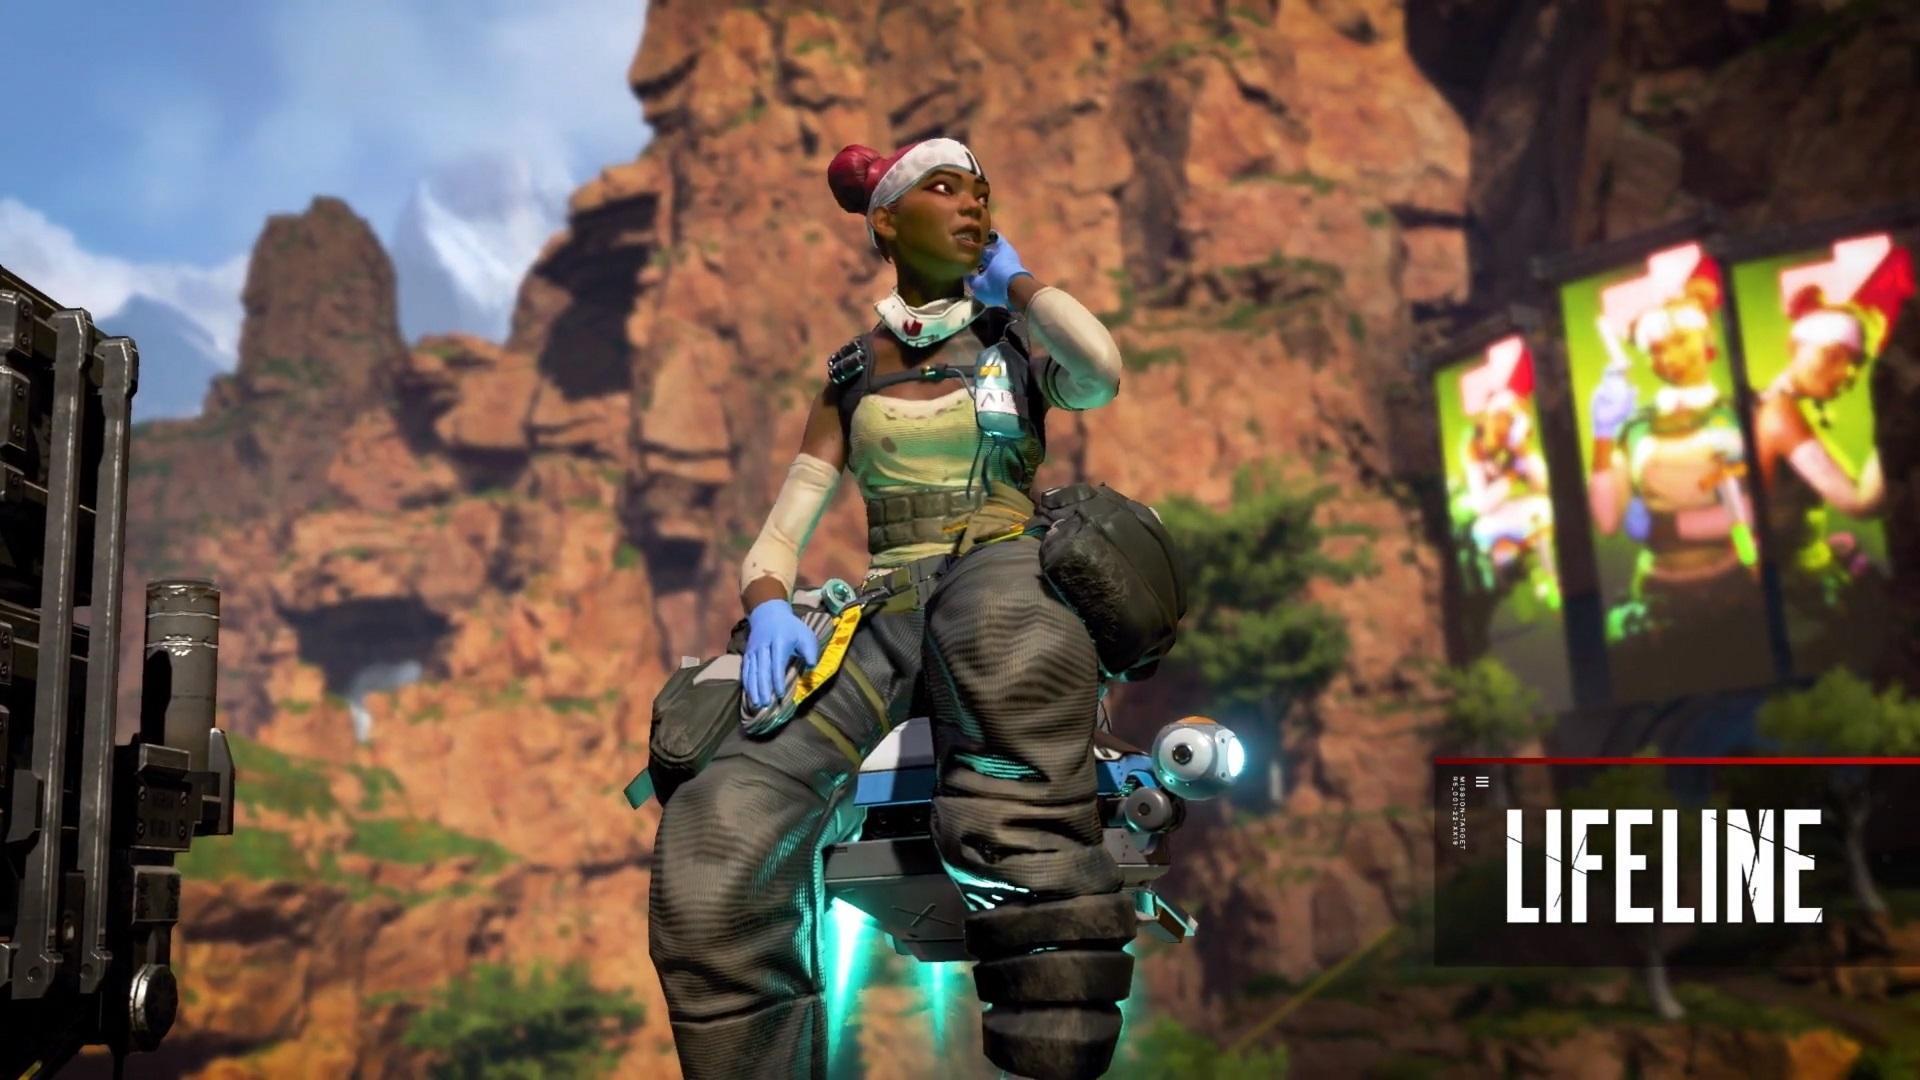 Nijigasaki Perfect Fans Paradise on X: Mayu-chi's Apex Legends Tournament  Match 1 Results Team Ranking: 7th Kills: 0 Damage Dealt: 55 Survival Time:  10:04 Players Revived: 0 Players Respawned: 0  / X